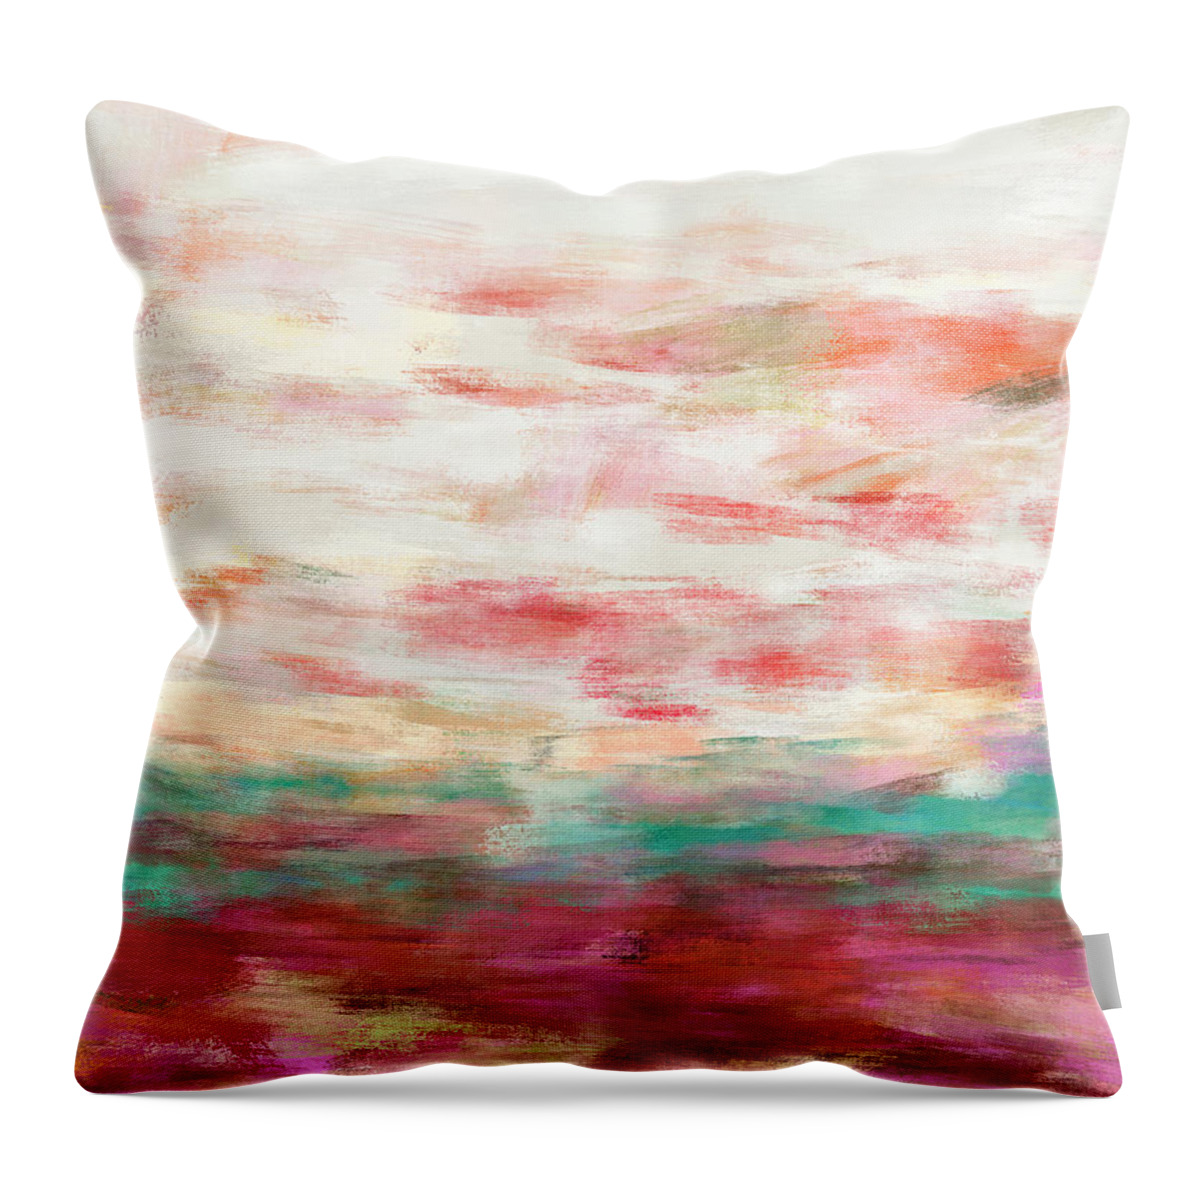 Abstract Throw Pillow featuring the painting Sunday Morning- Art by Linda Woods by Linda Woods